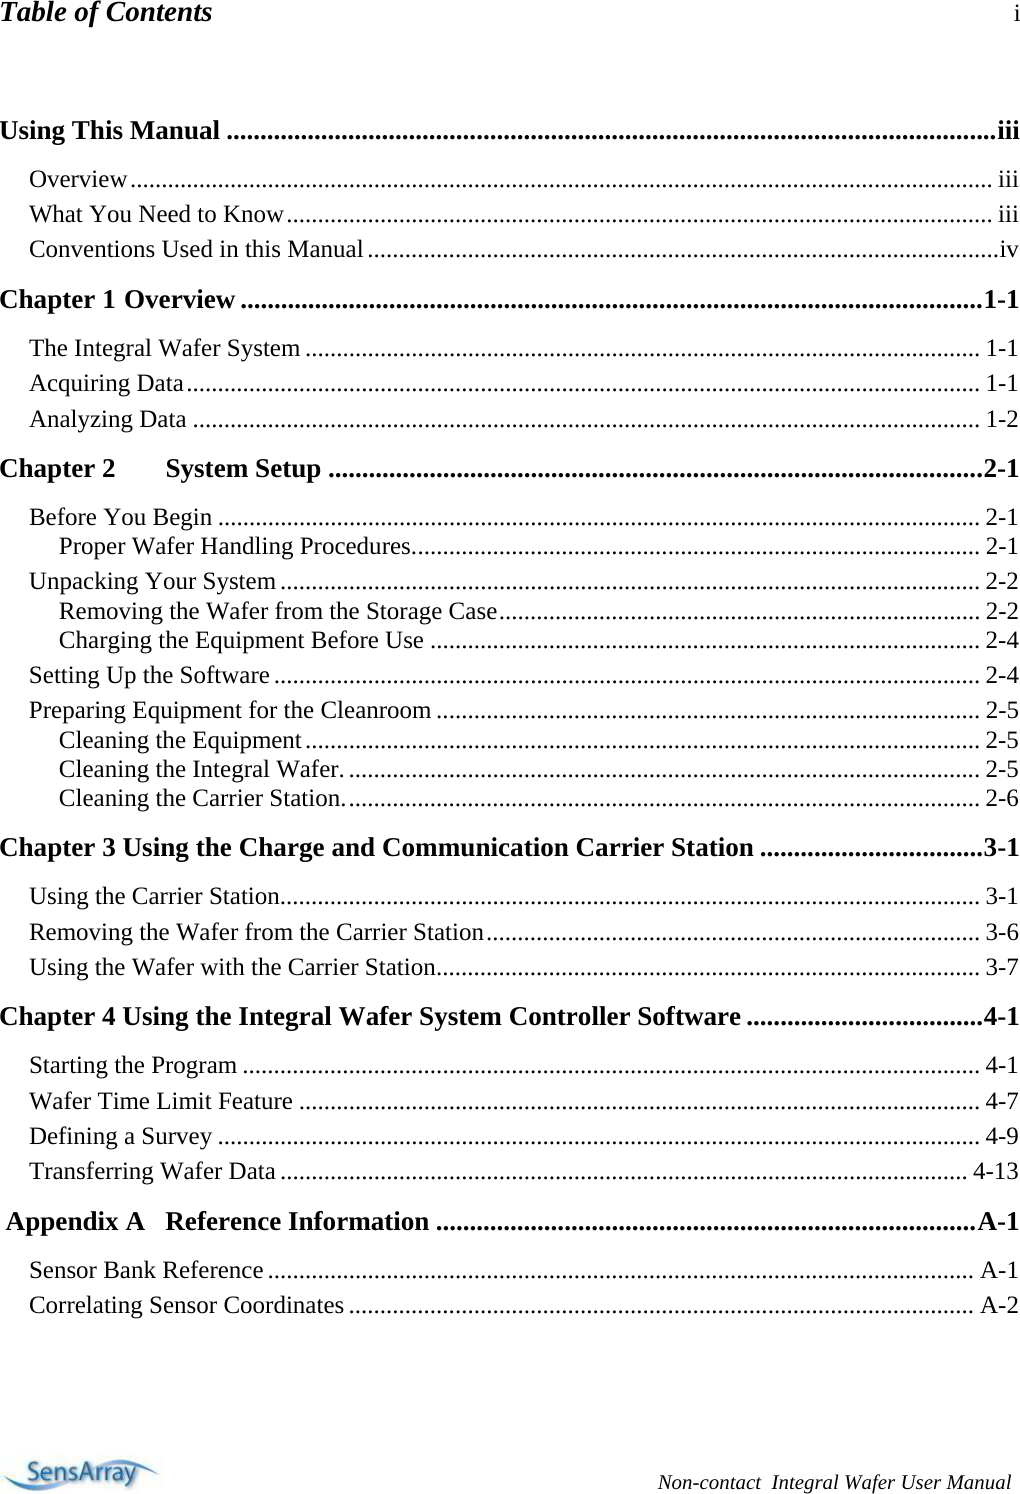 Table of Contents i   Non-contact  Integral Wafer User Manual  Using This Manual ..................................................................................................................iii Overview.......................................................................................................................................... iii What You Need to Know................................................................................................................. iii Conventions Used in this Manual.....................................................................................................iv Chapter 1 Overview ..............................................................................................................1-1 The Integral Wafer System ............................................................................................................ 1-1 Acquiring Data............................................................................................................................... 1-1 Analyzing Data .............................................................................................................................. 1-2 Chapter 2  System Setup .................................................................................................2-1 Before You Begin .......................................................................................................................... 2-1 Proper Wafer Handling Procedures........................................................................................... 2-1 Unpacking Your System................................................................................................................ 2-2 Removing the Wafer from the Storage Case............................................................................. 2-2 Charging the Equipment Before Use ........................................................................................ 2-4 Setting Up the Software................................................................................................................. 2-4 Preparing Equipment for the Cleanroom ....................................................................................... 2-5 Cleaning the Equipment............................................................................................................ 2-5 Cleaning the Integral Wafer...................................................................................................... 2-5 Cleaning the Carrier Station...................................................................................................... 2-6 Chapter 3 Using the Charge and Communication Carrier Station .................................3-1 Using the Carrier Station................................................................................................................ 3-1 Removing the Wafer from the Carrier Station............................................................................... 3-6 Using the Wafer with the Carrier Station....................................................................................... 3-7 Chapter 4 Using the Integral Wafer System Controller Software ...................................4-1 Starting the Program ...................................................................................................................... 4-1 Wafer Time Limit Feature ............................................................................................................. 4-7 Defining a Survey .......................................................................................................................... 4-9 Transferring Wafer Data.............................................................................................................. 4-13  Appendix A   Reference Information ................................................................................A-1 Sensor Bank Reference ................................................................................................................. A-1 Correlating Sensor Coordinates .................................................................................................... A-2        